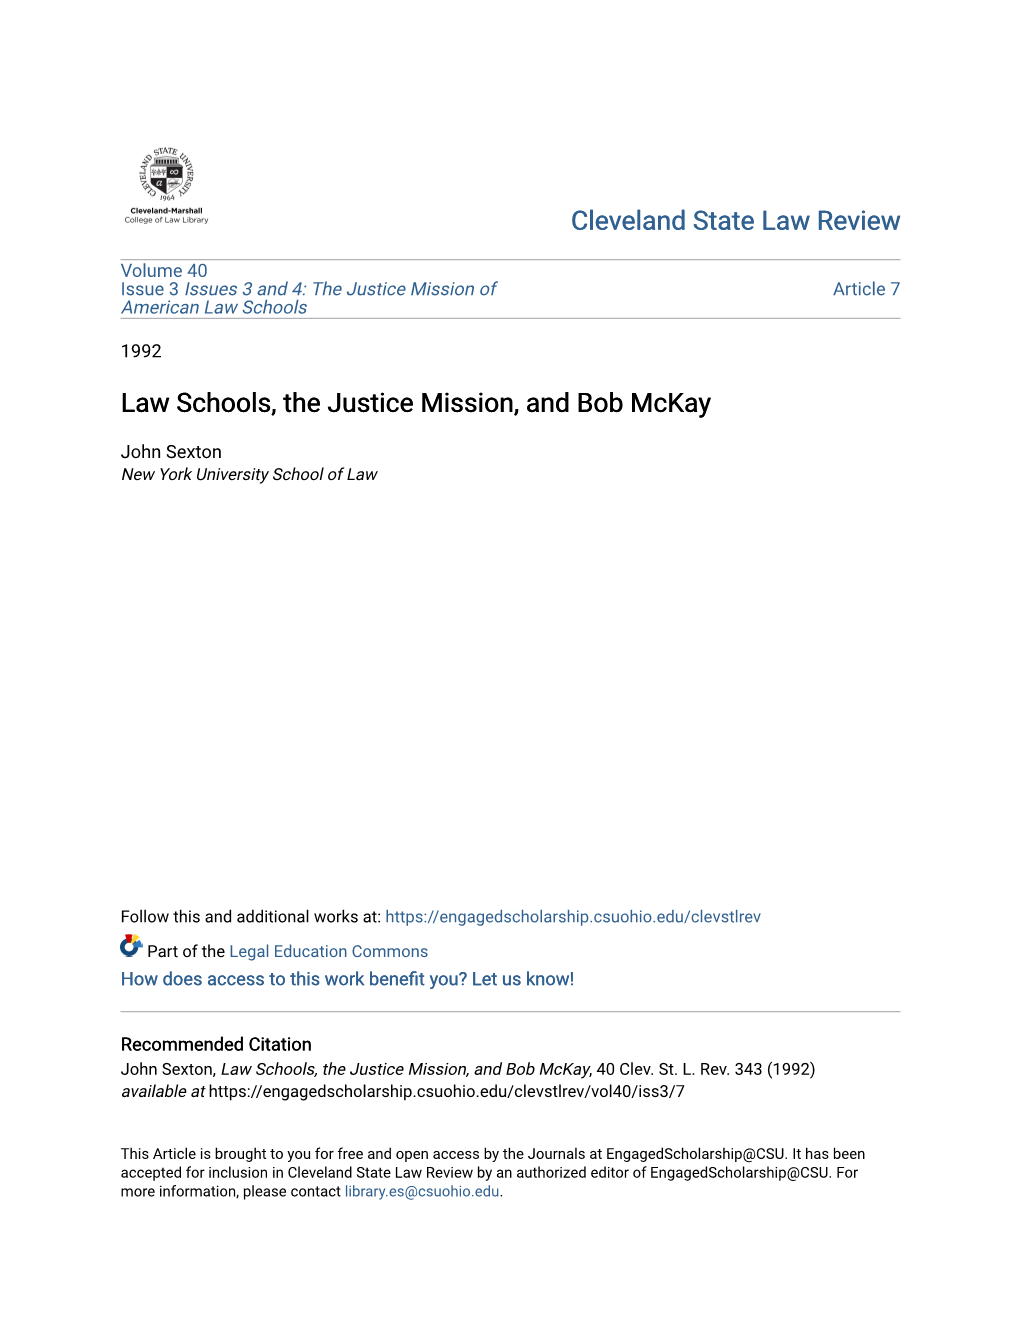 Law Schools, the Justice Mission, and Bob Mckay